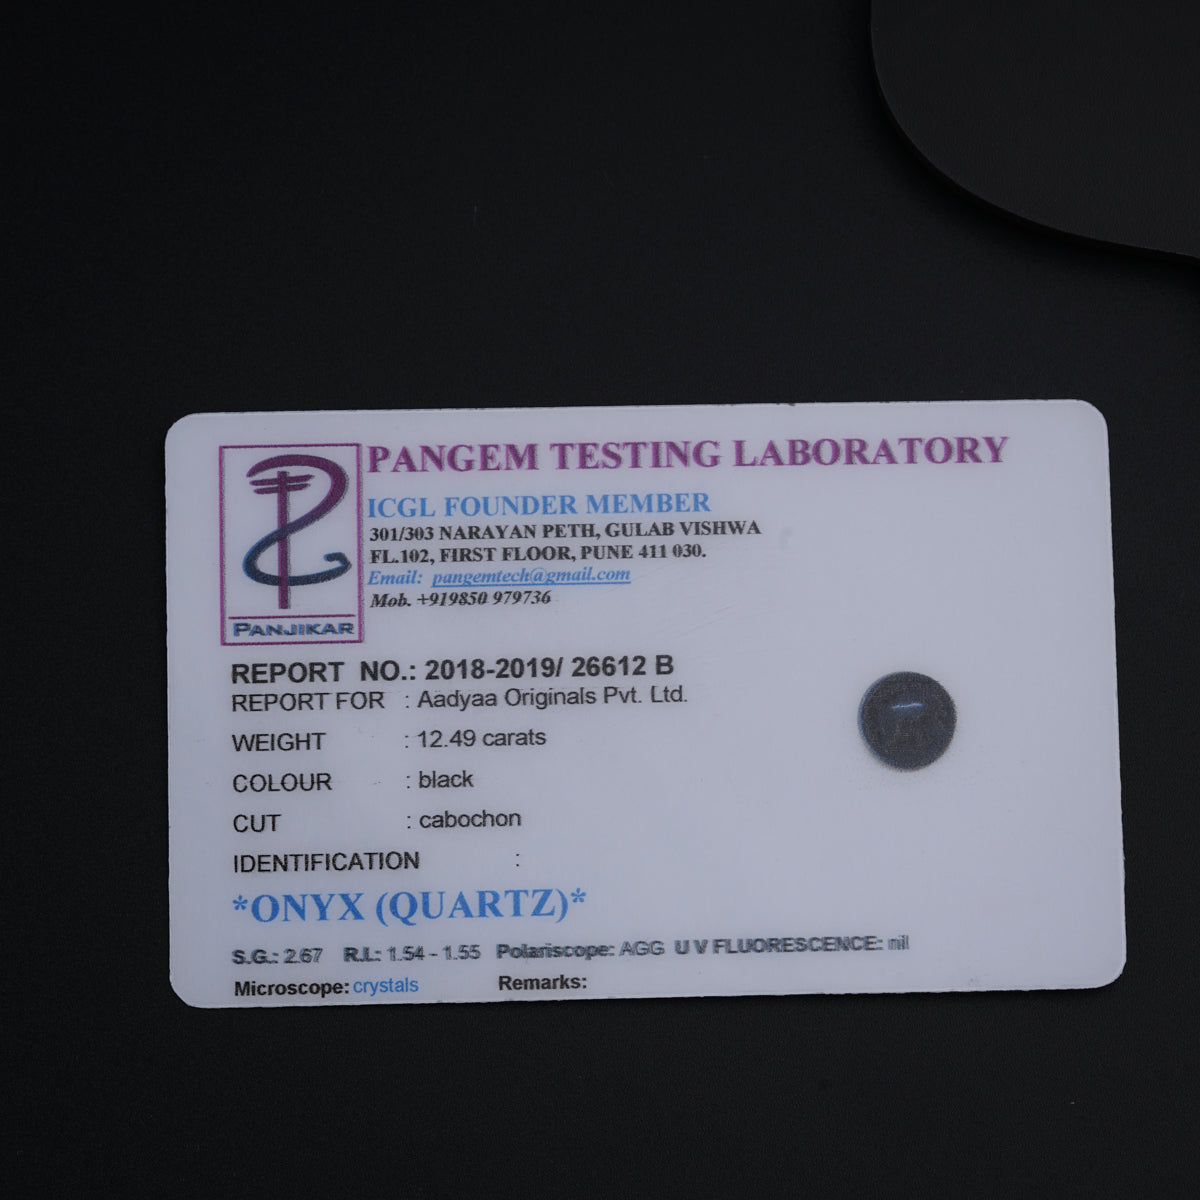 a tag on a table that says pancem testing laboratory